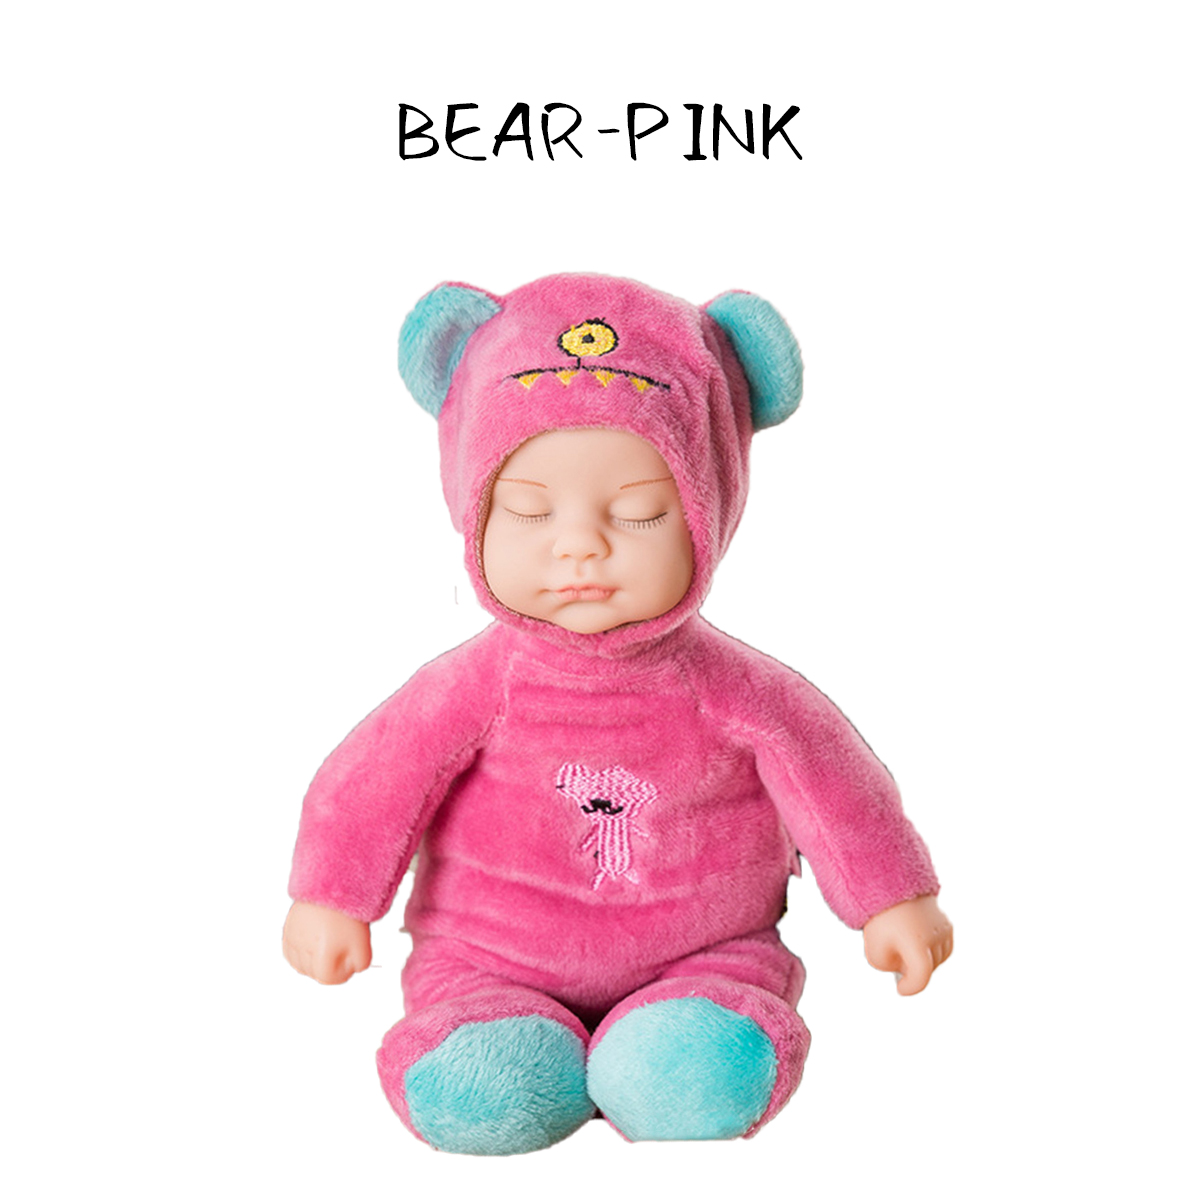 23CM-Soft-Silicone-Vinyl-Lifelike-Realistic-Reborn-Cute-Bear-Rabbit-Doll-Toy-with-Clothes-1722622-5